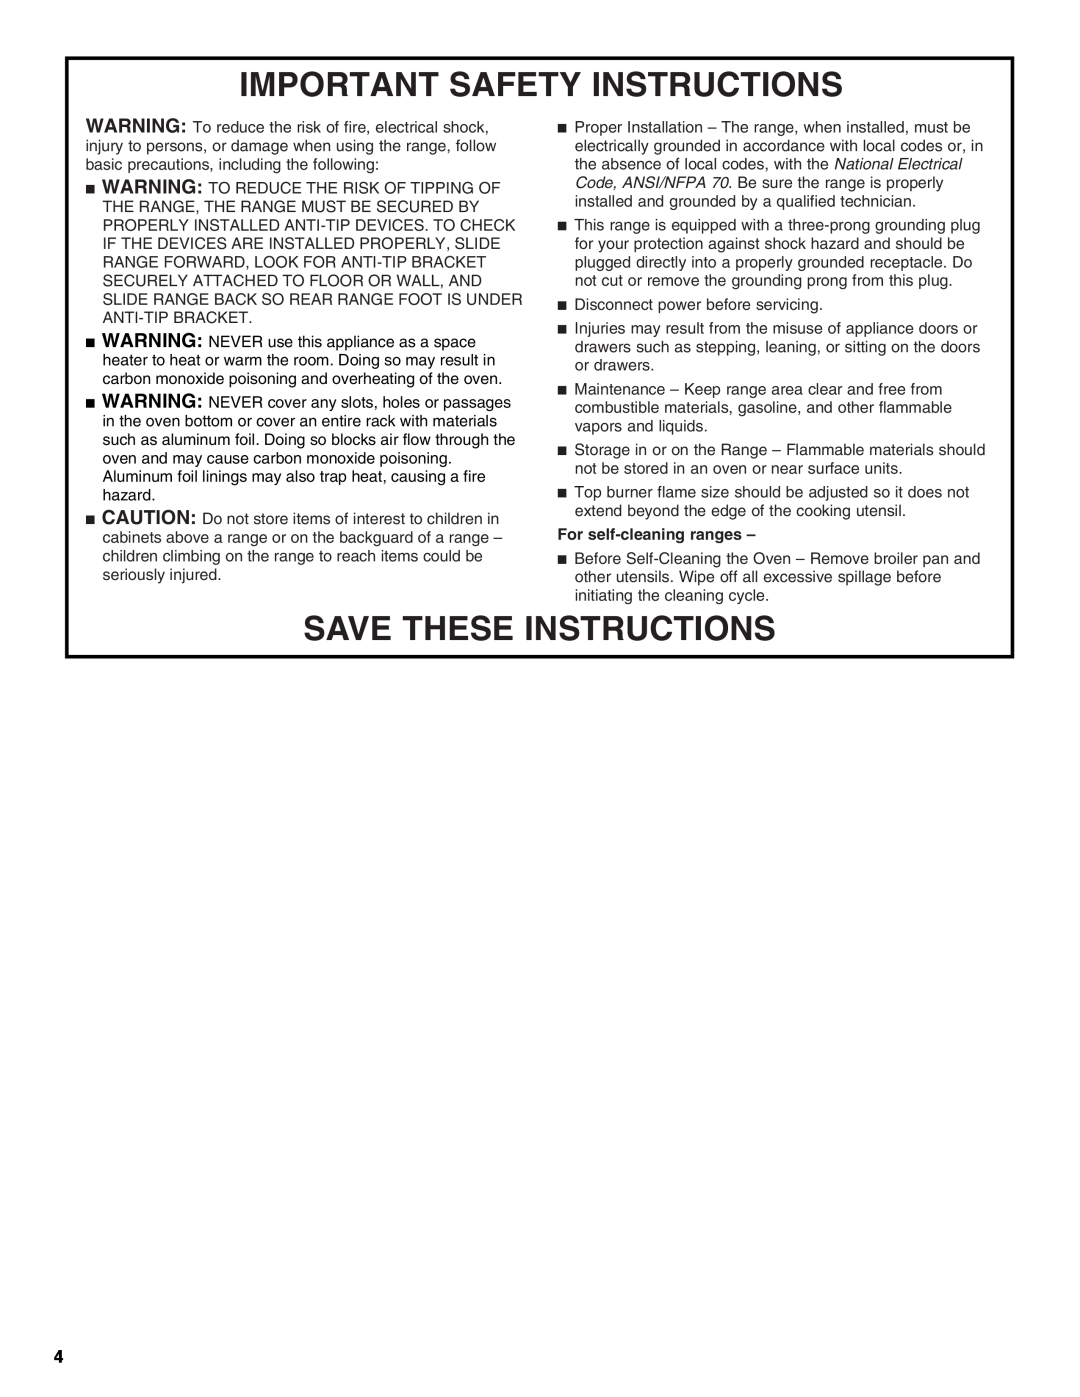 Maytag W10249696A, W10239463A warranty Important Safety Instructions, Save These Instructions, For self-cleaning ranges 